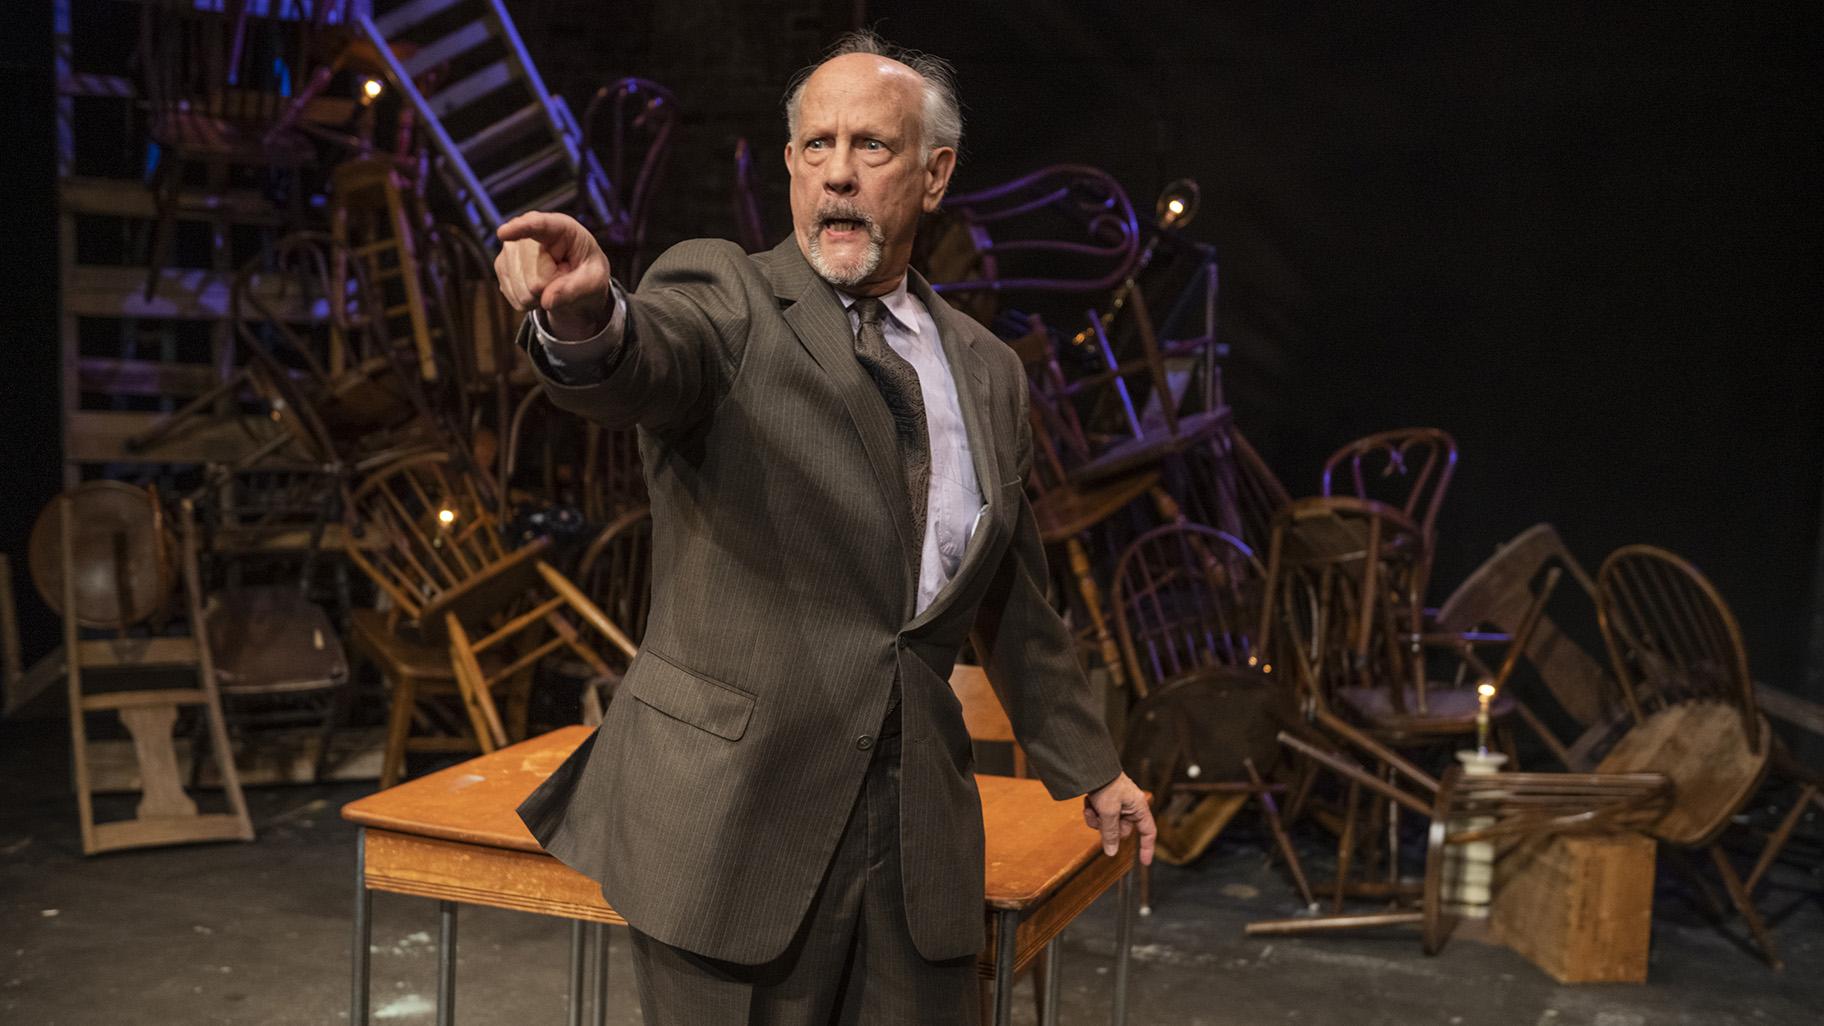 Jim Ortlieb performs in John Kolvenbach’s “Stand Up If You’re Here Tonight,” now running at American Blues Theater through April 9, 2022. (Credit Michael Brosilow)